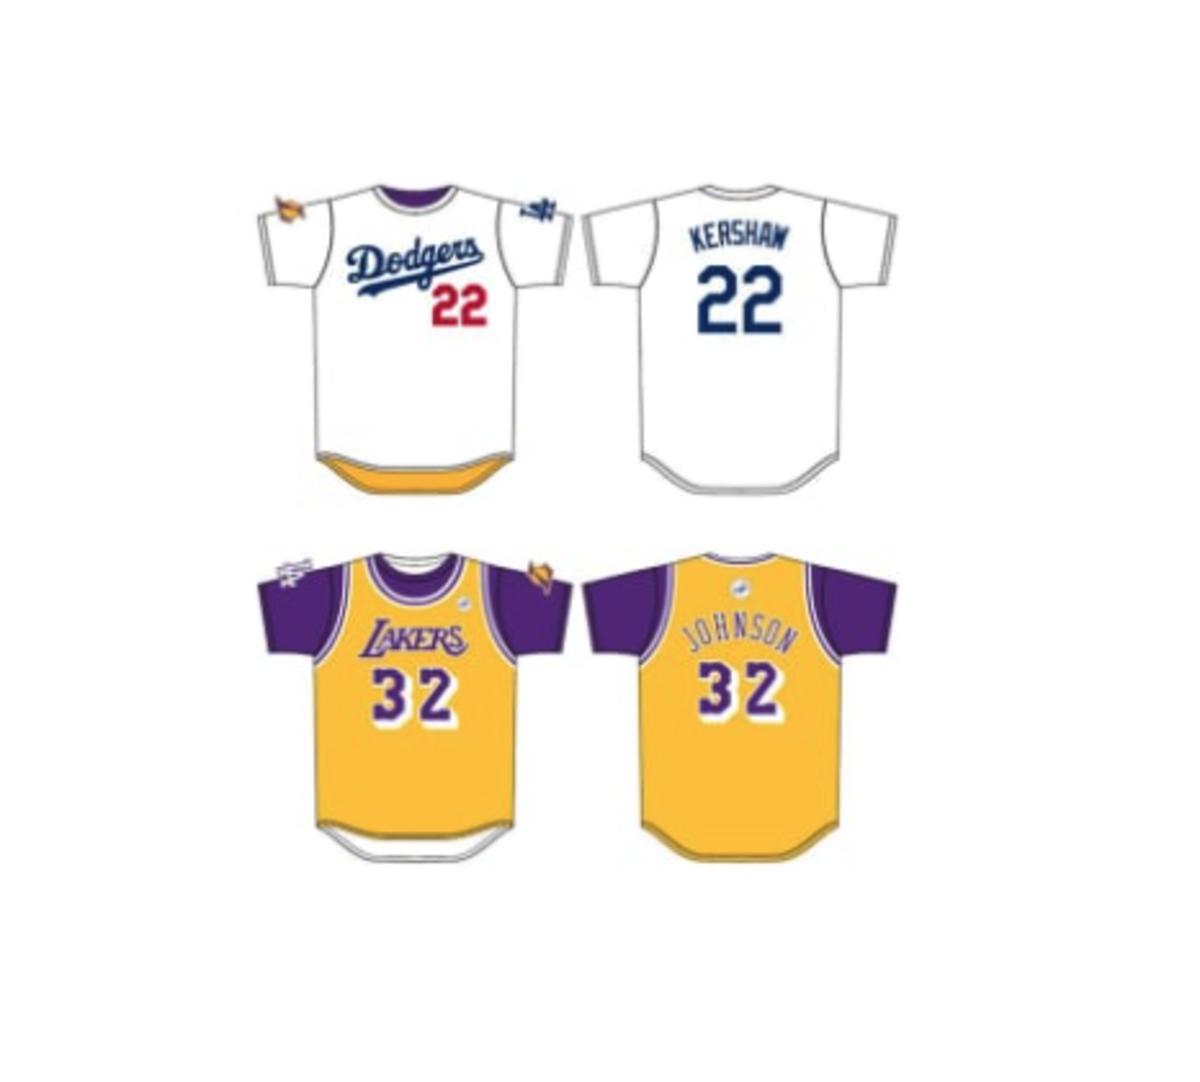 dodgers and lakers jersey